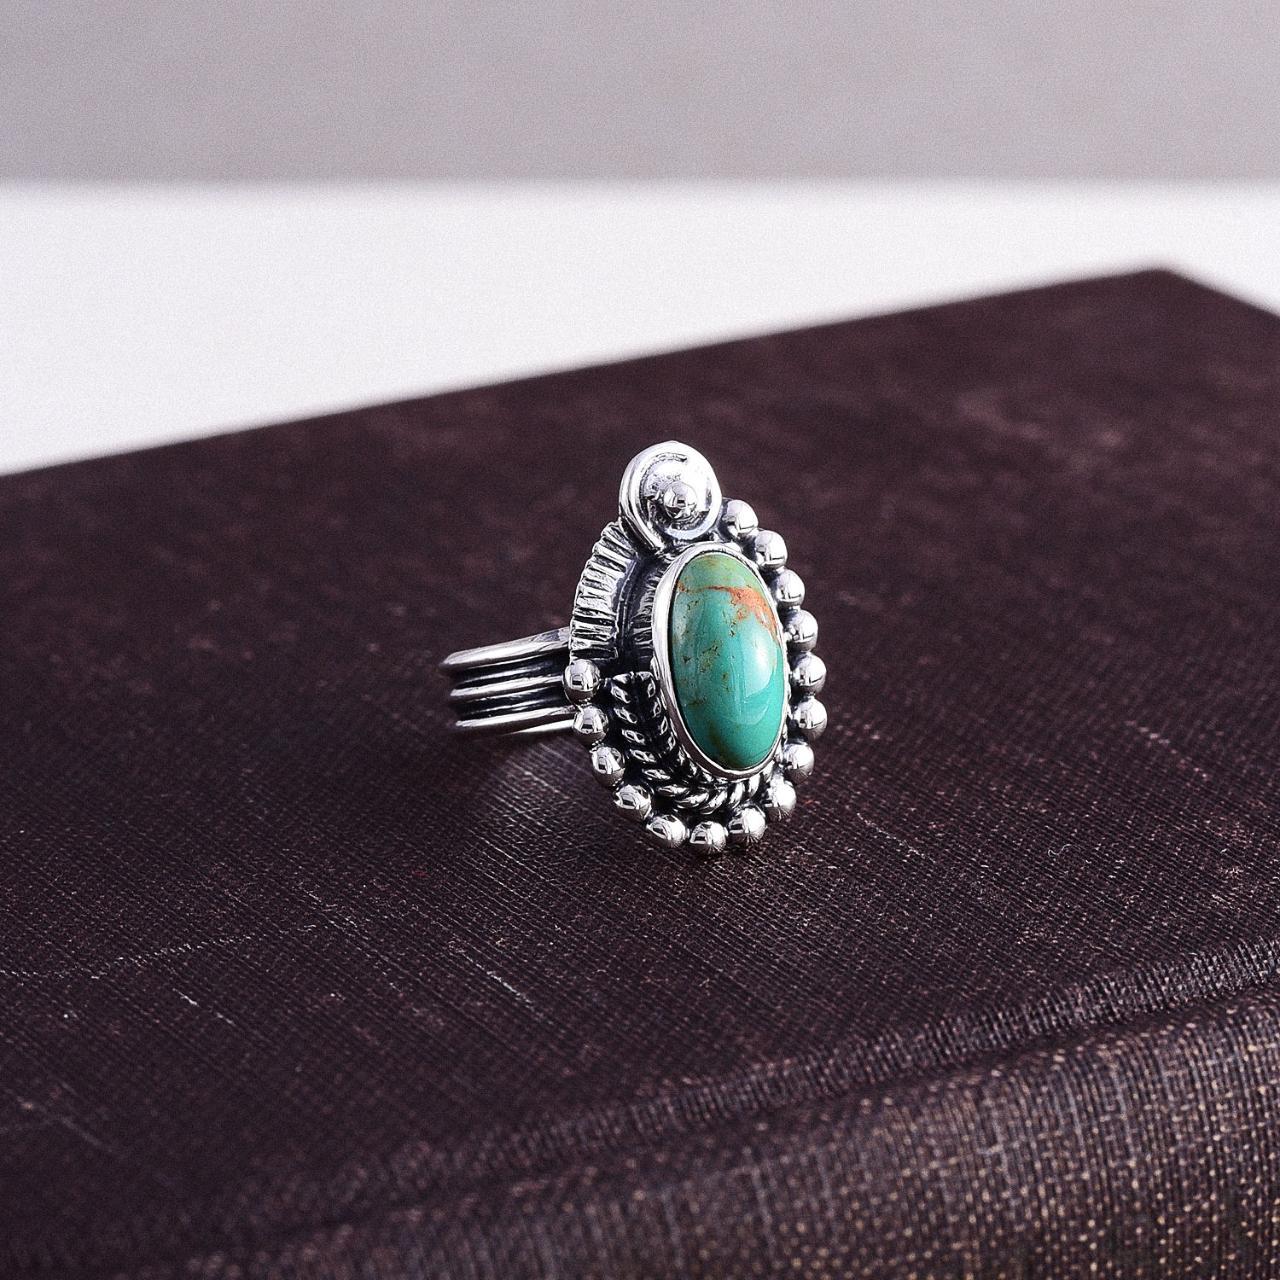 Product Image 1 - Sterling 925 Turquoise Ring

Sterling Silver

Size